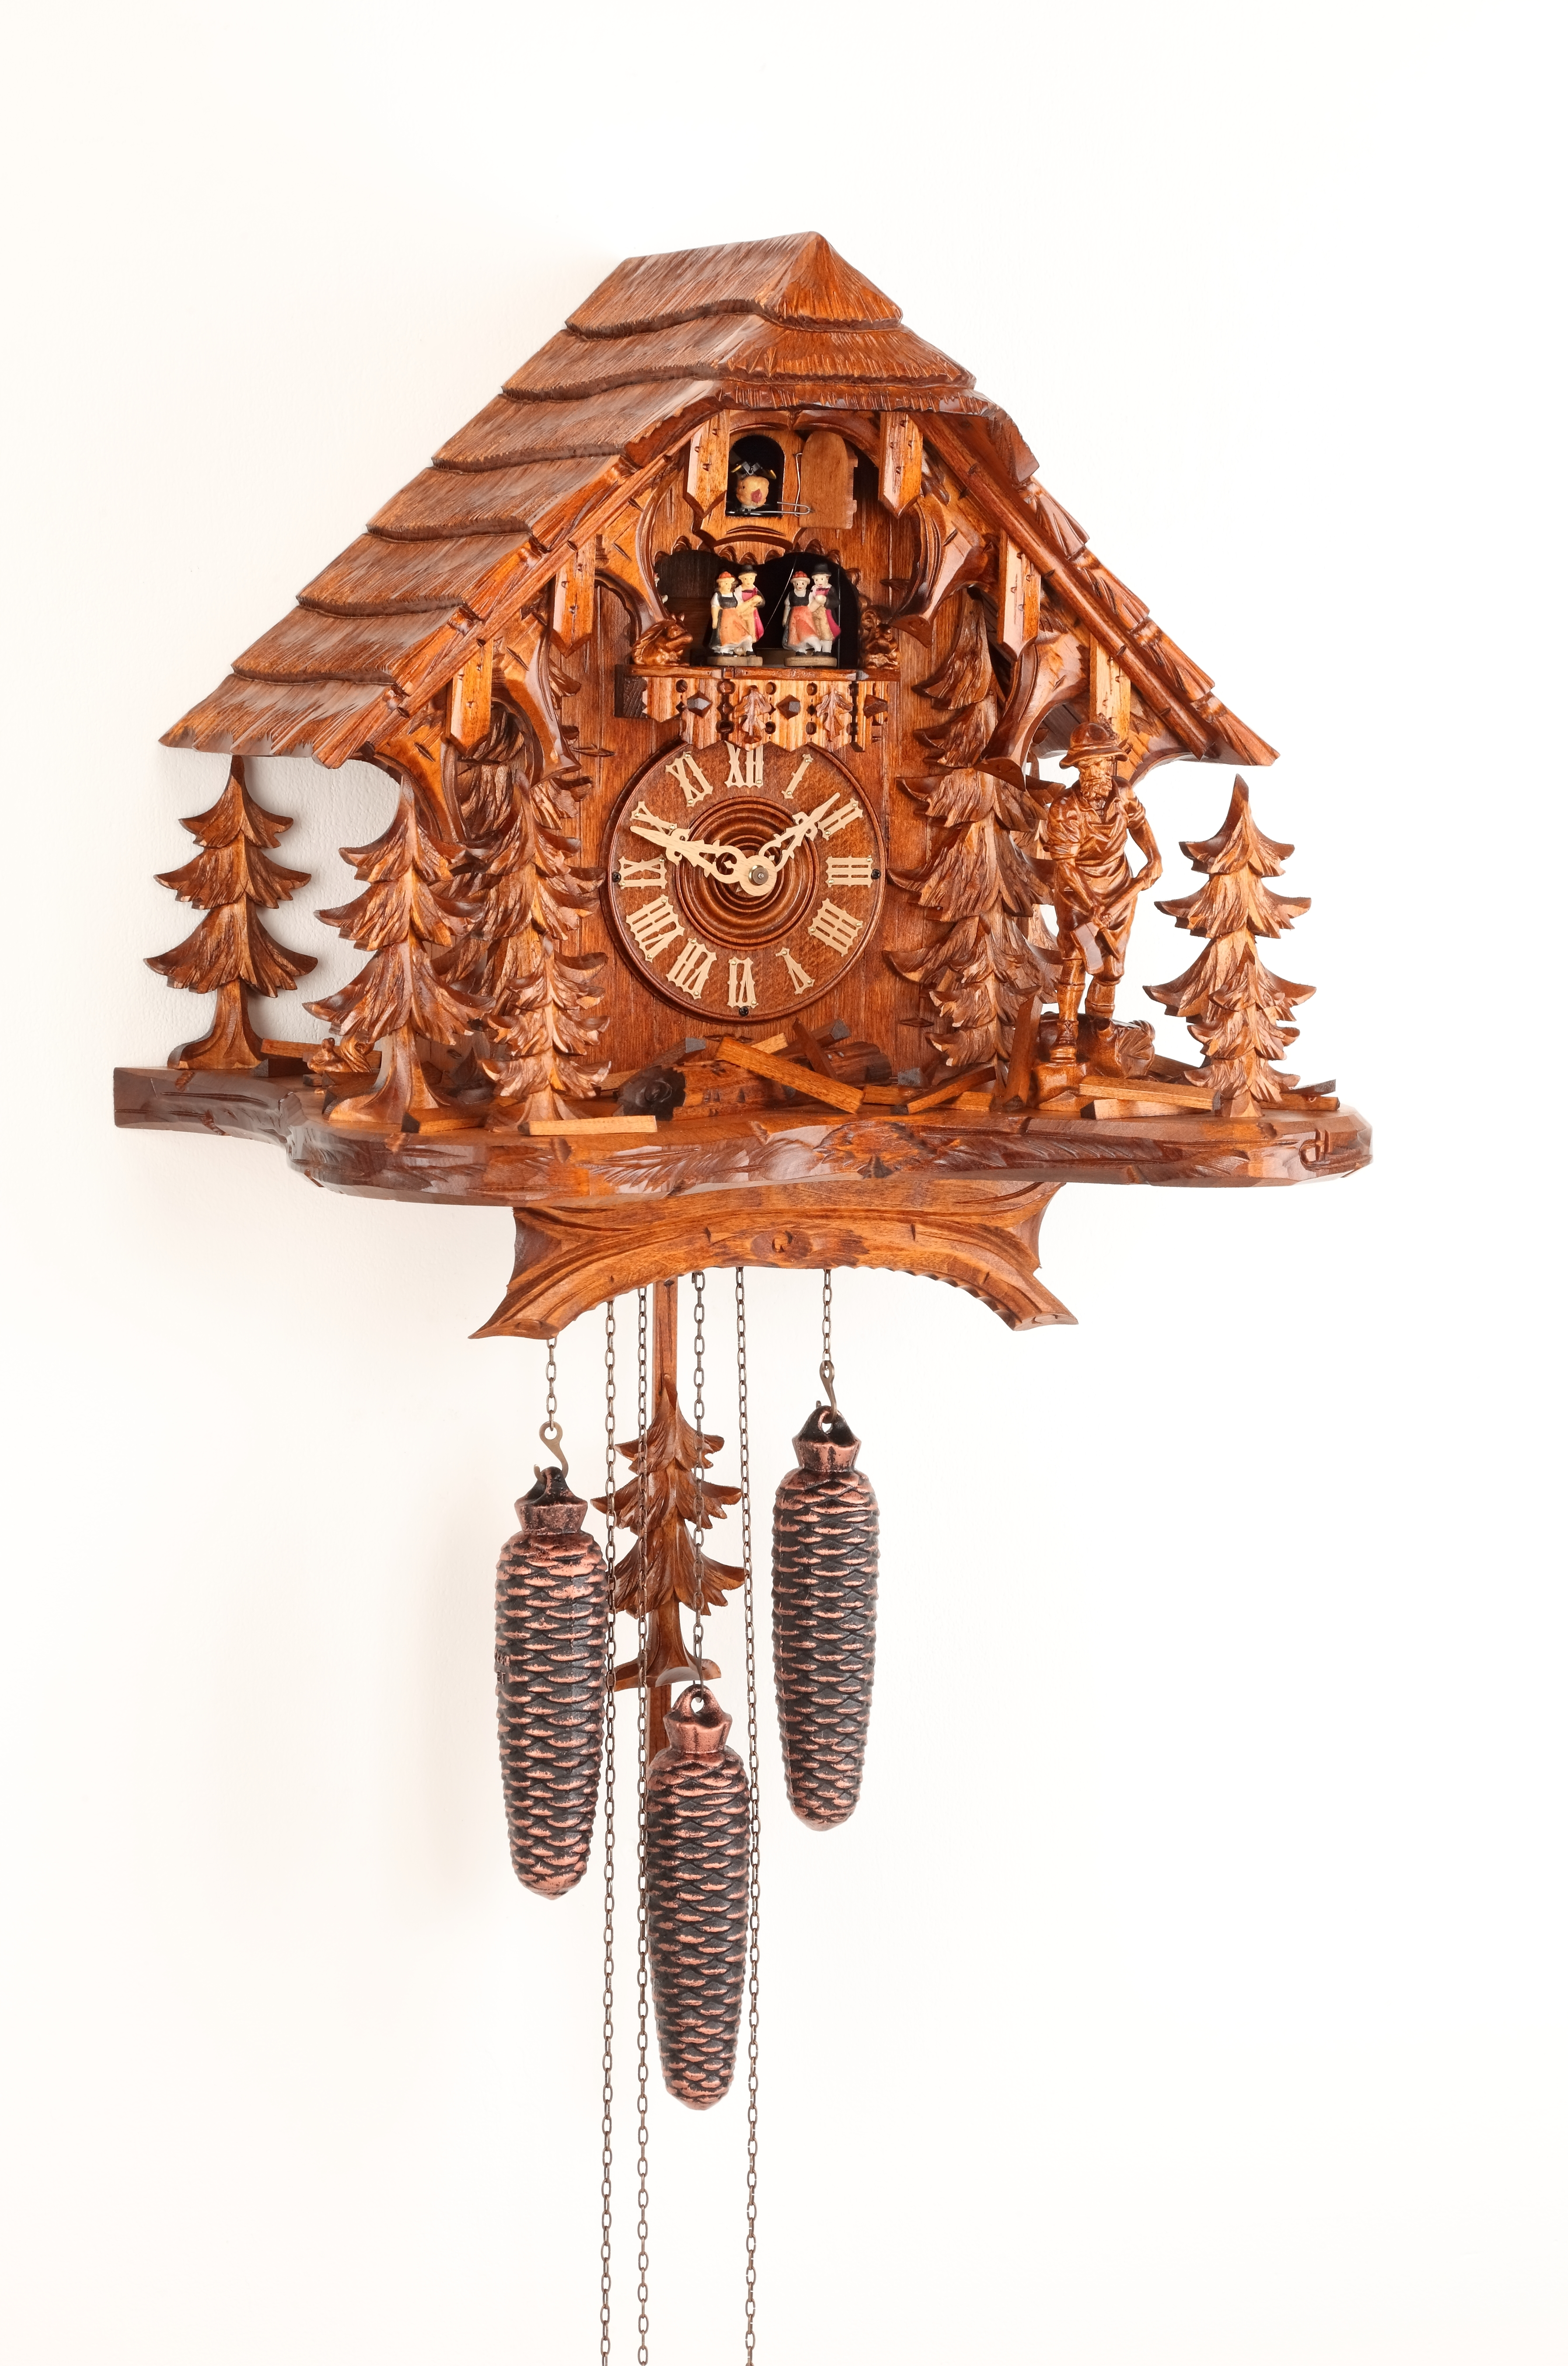 8 Days Music Dancer  Cuckoo Clock Black Forest House with Woodcutter